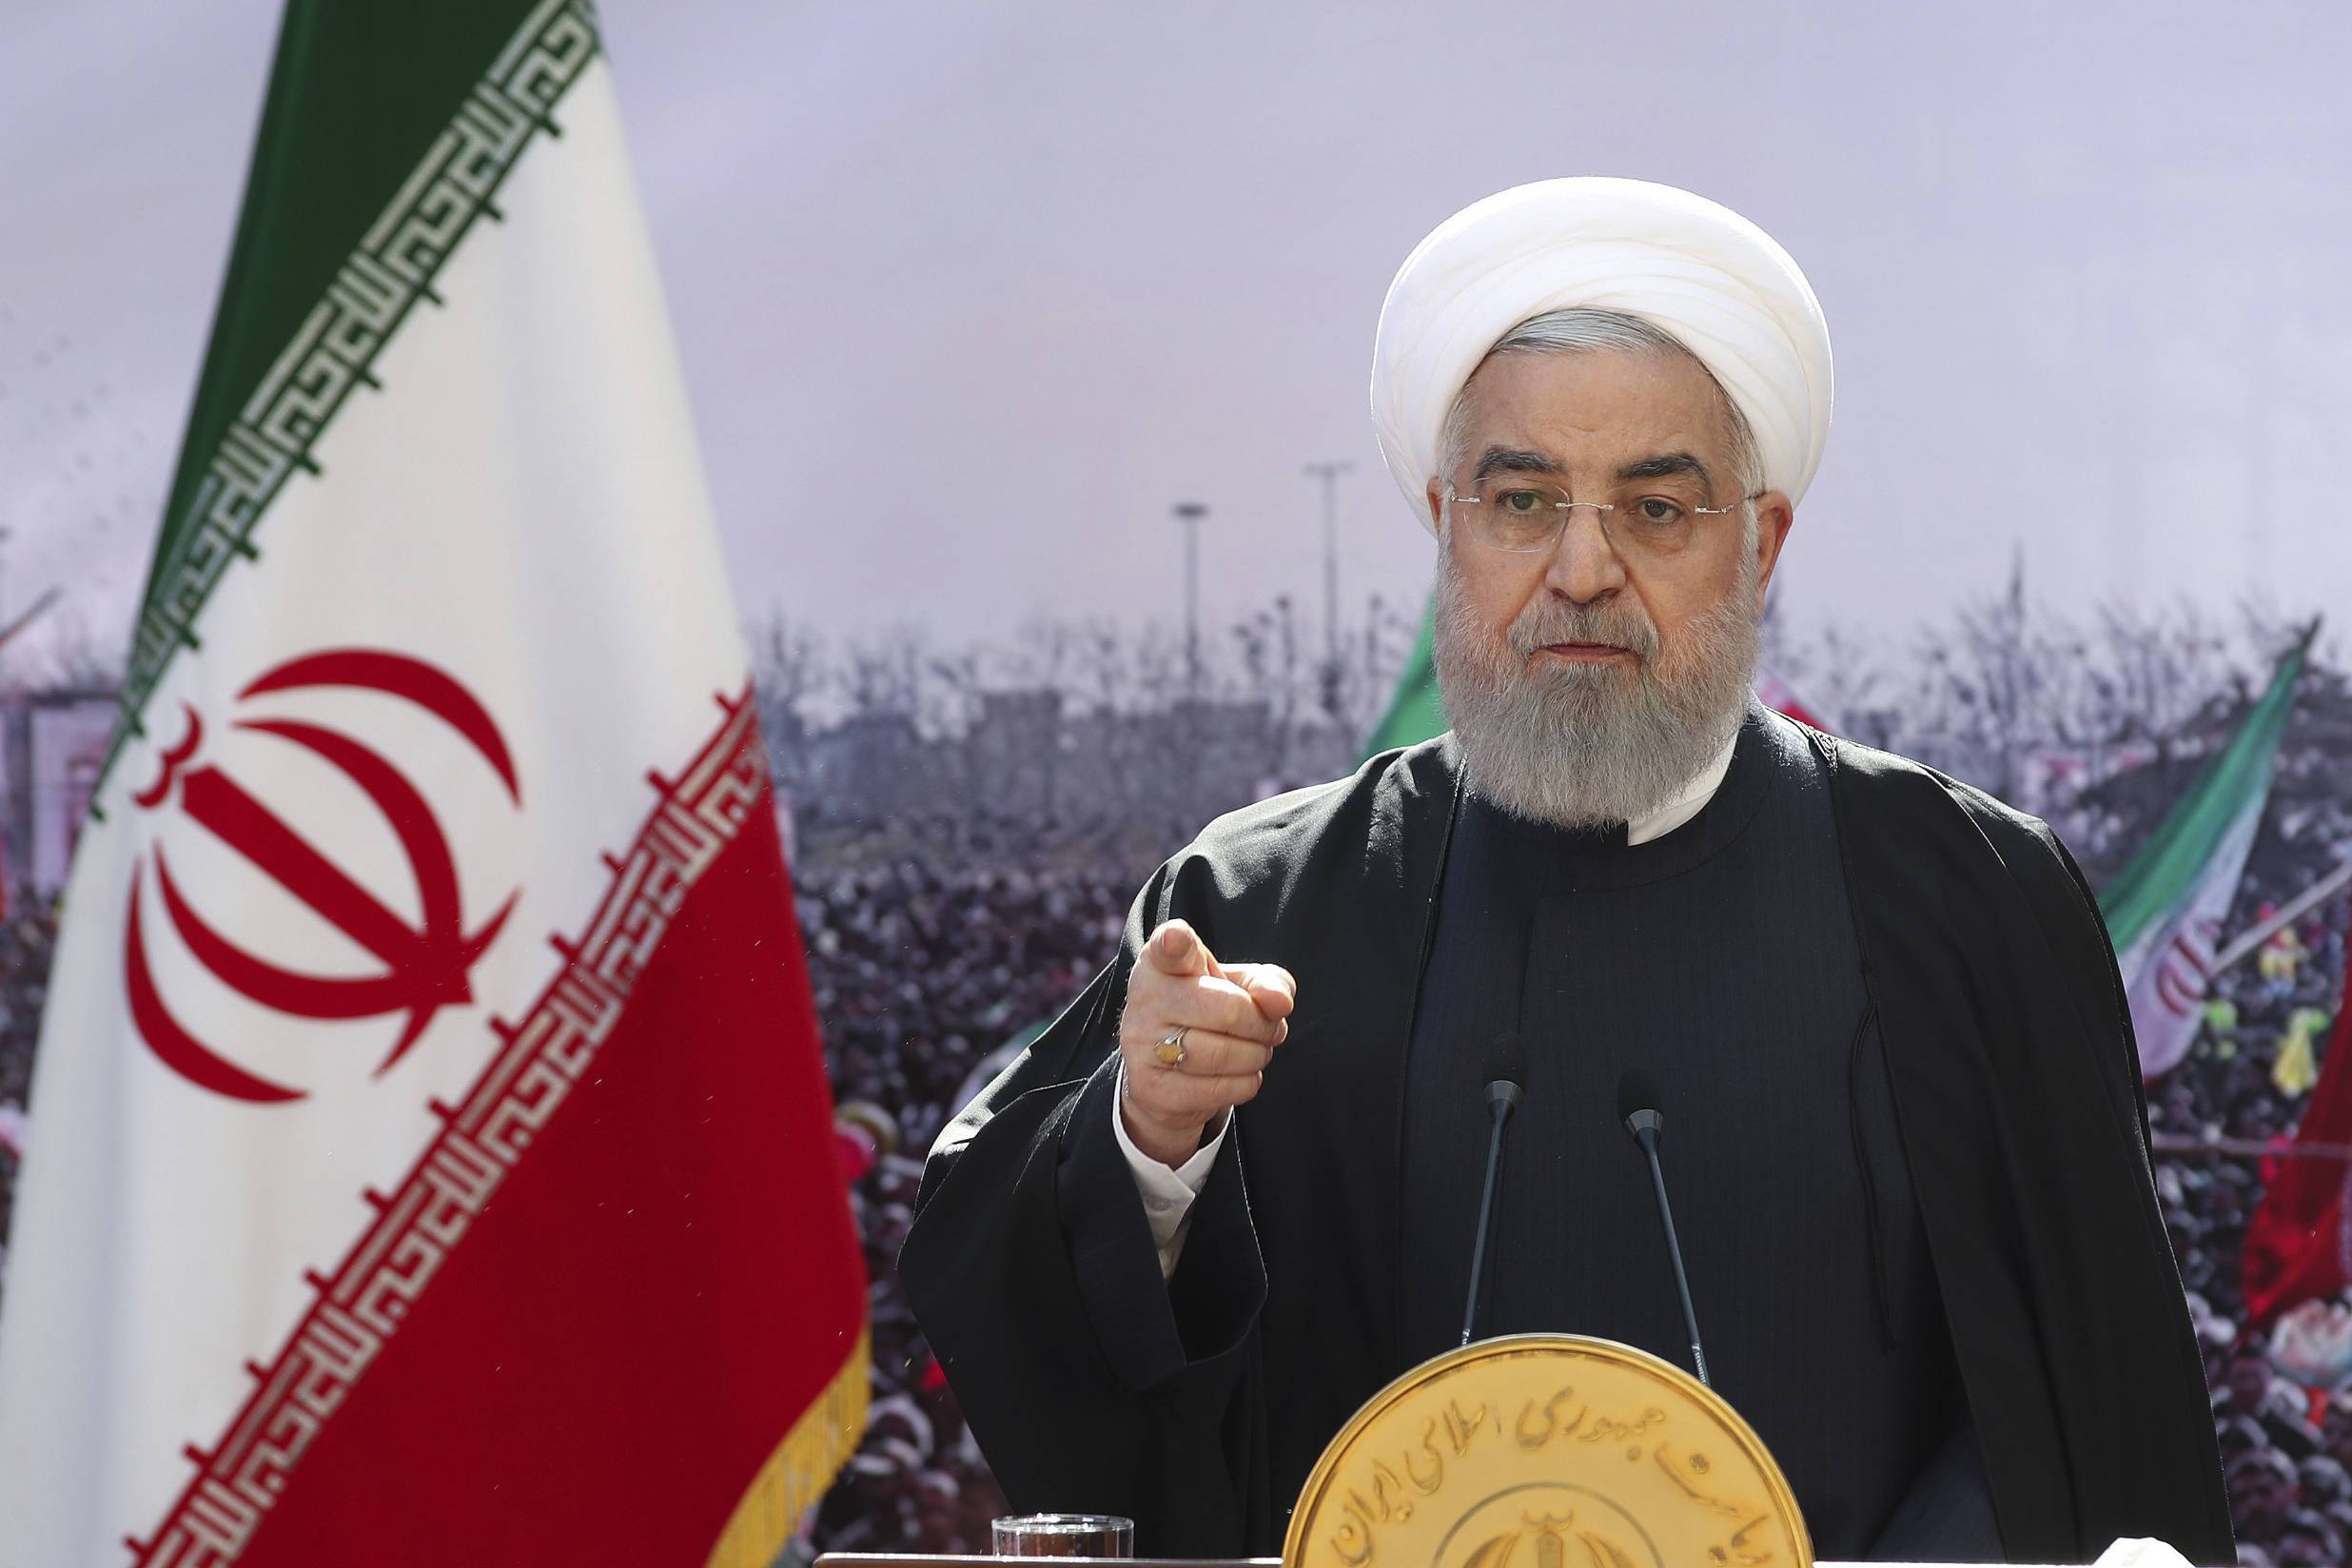 In this photo released by the official website of the office of the Iranian Presidency, President Hassan Rouhani addresses the nation in a televised speech in Tehran, Iran, Wednesday, Feb. 10, 2021. Rouhani said the West has no way except reaching an agreement with Tehran for restoring 2015 nuclear deal as the nation marked the anniversary of the country's 1979 Islamic Revolution on Wednesday on wheels - cars, motorcycles, bicycles - instead of traditional rallies and marches because of the region's worst outbreak of the coronavirus. (Iranian Presidency Office via AP)/VAH101/21041337635133/AP PROVIDES ACCESS TO THIS PUBLICLY DISTRIBUTED HANDOUT PHOTO PROVIDED BY IRANIAN PRESIDENCY OFFICE. MANDATORY CREDIT./2102101030